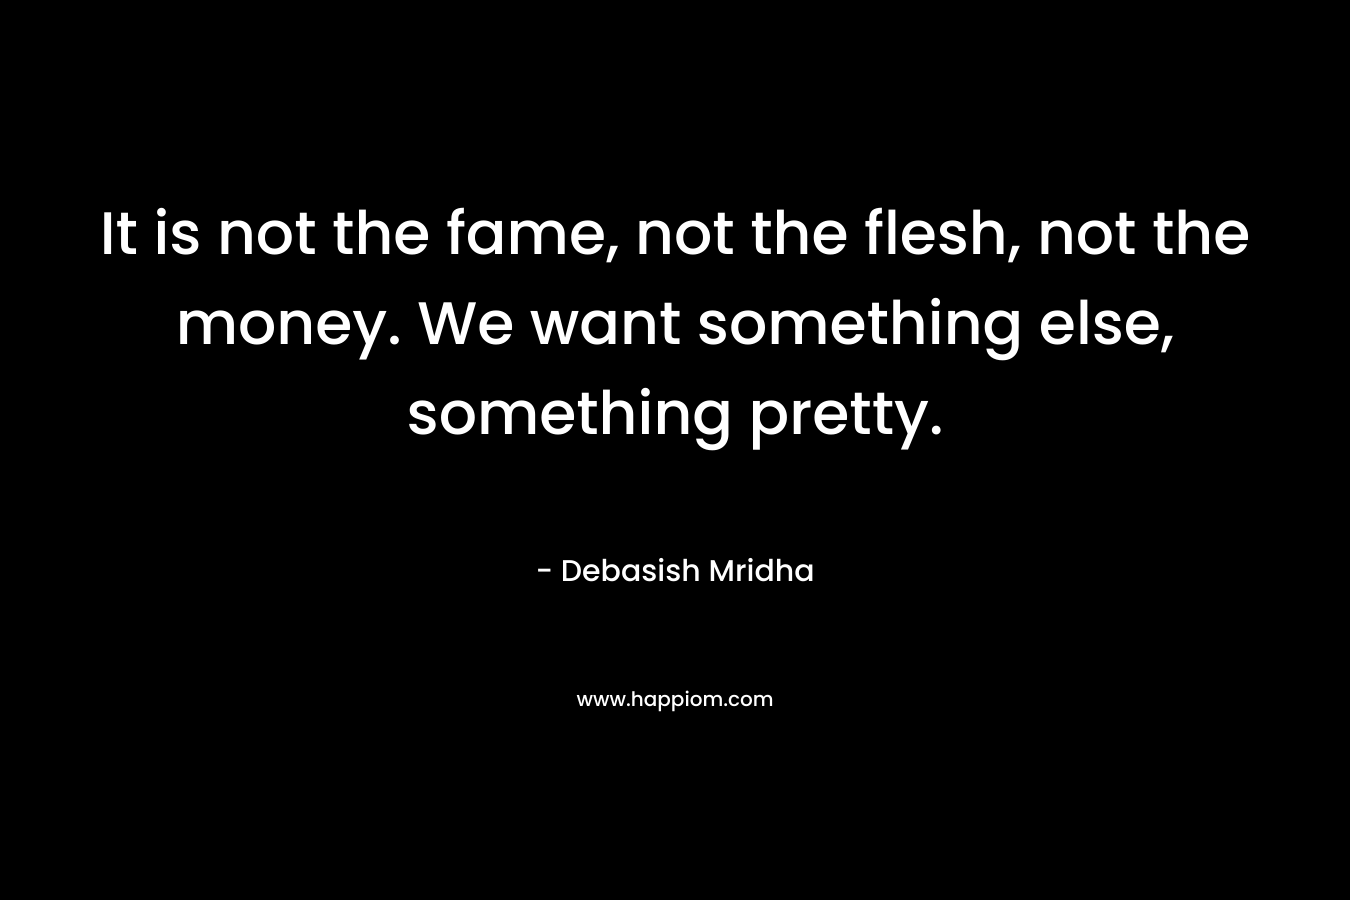 It is not the fame, not the flesh, not the money. We want something else, something pretty.